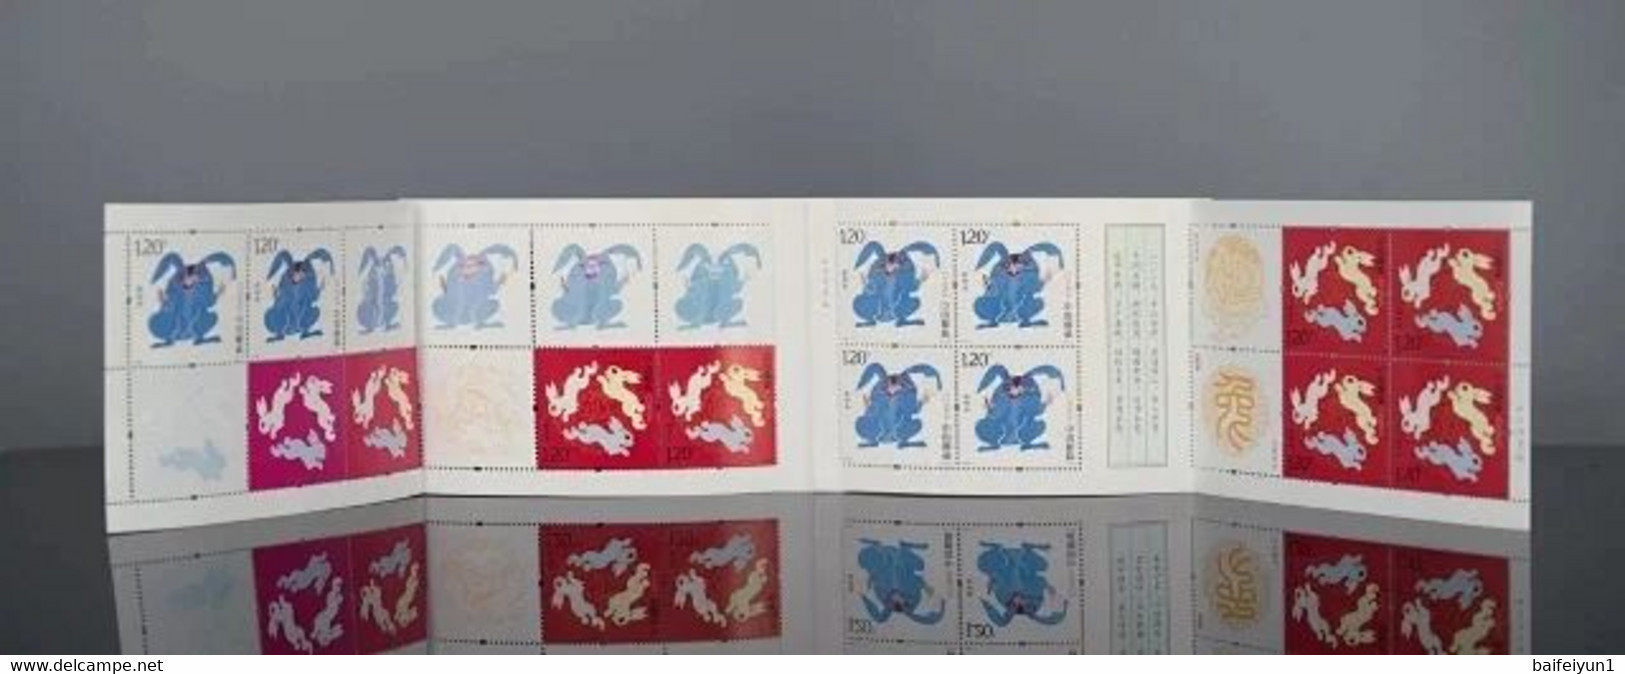 CHINA 2023-1 China New Year Zodiac Of Rabbit Stamp Booklet(Hologram Cover) - Hologrammes